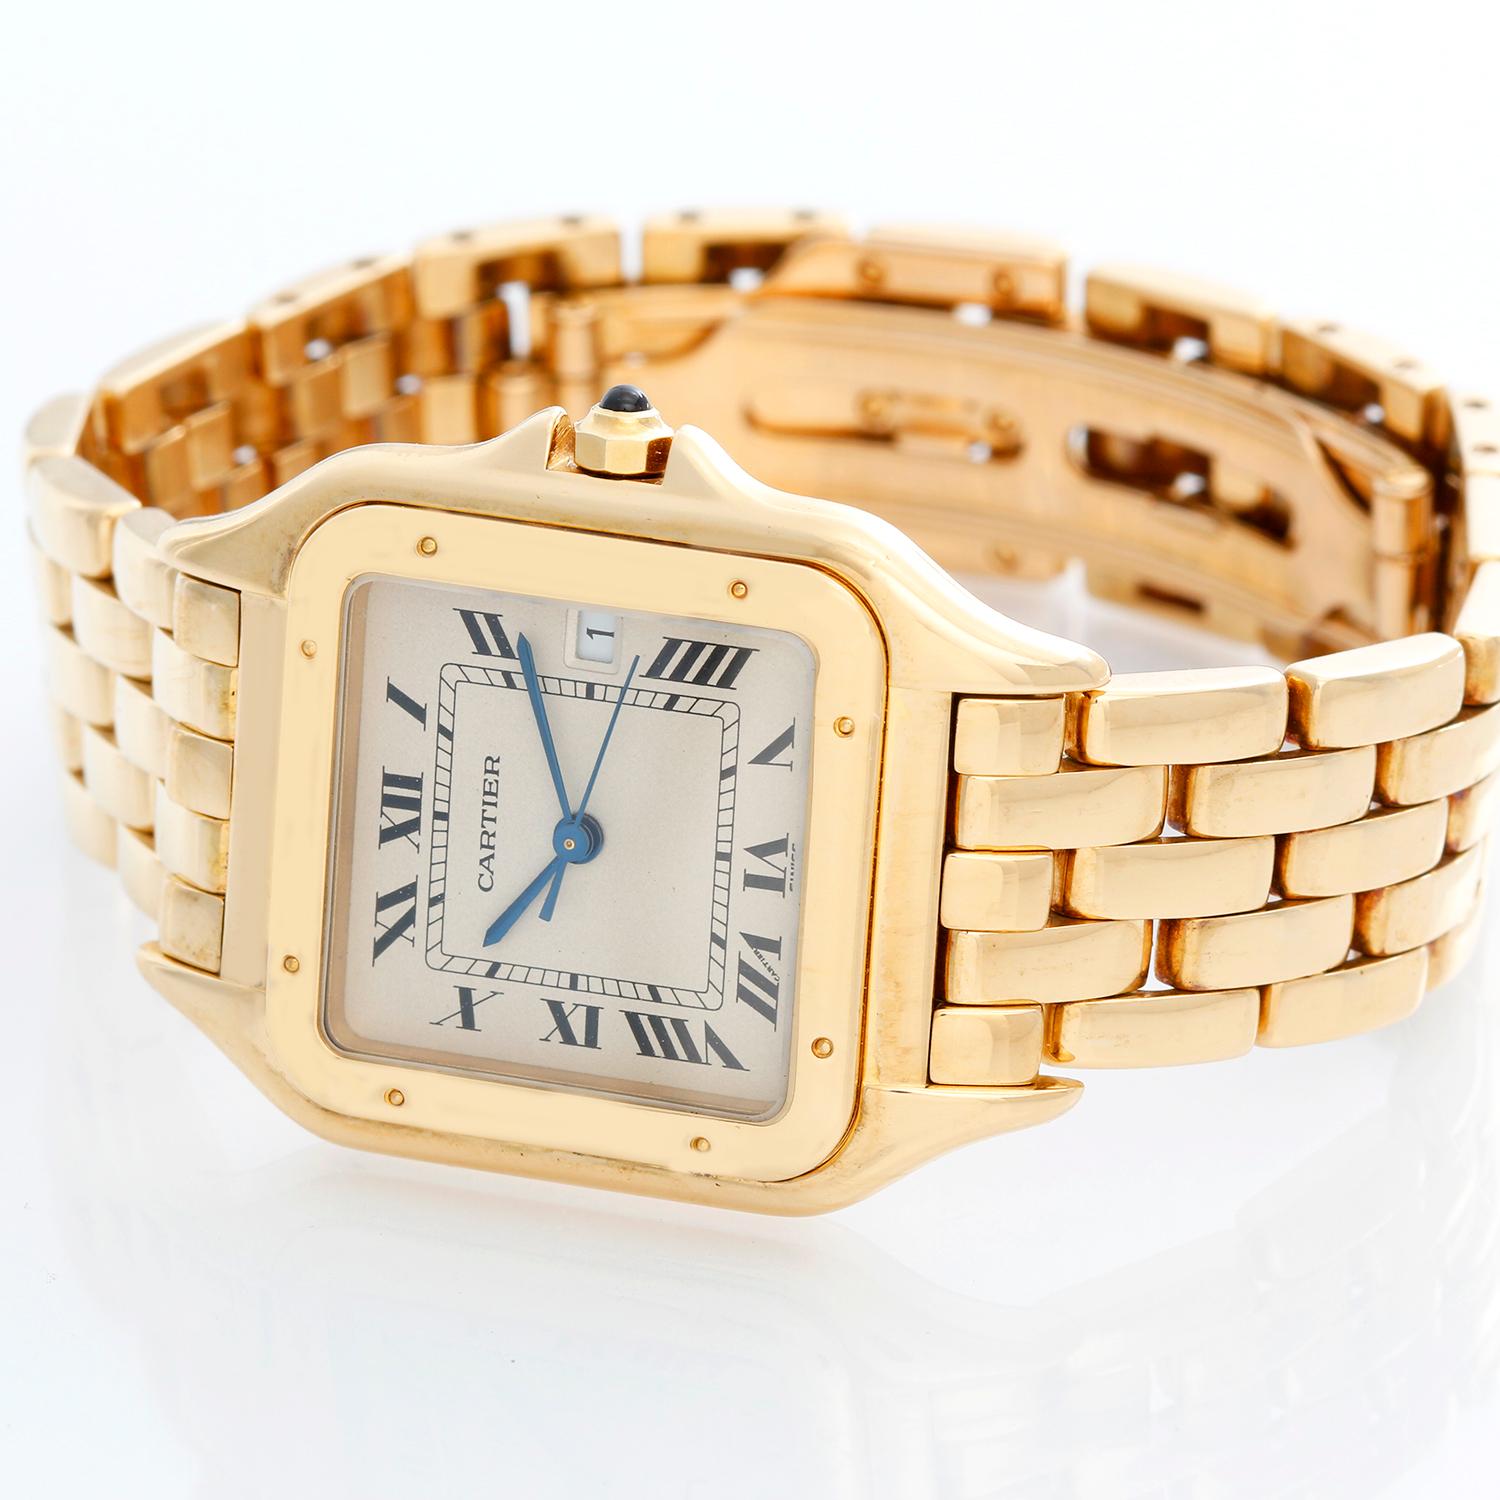 Cartier Panther 18k Yellow Gold Men's Quartz Watch with Date W25014B9 -  Quartz. 18k yellow gold case (27mm x 37mm). Ivory colored dial with black Roman numerals and date at 3 o'clock. 18k yellow gold Cartier Panther bracelet with deployant clasp.